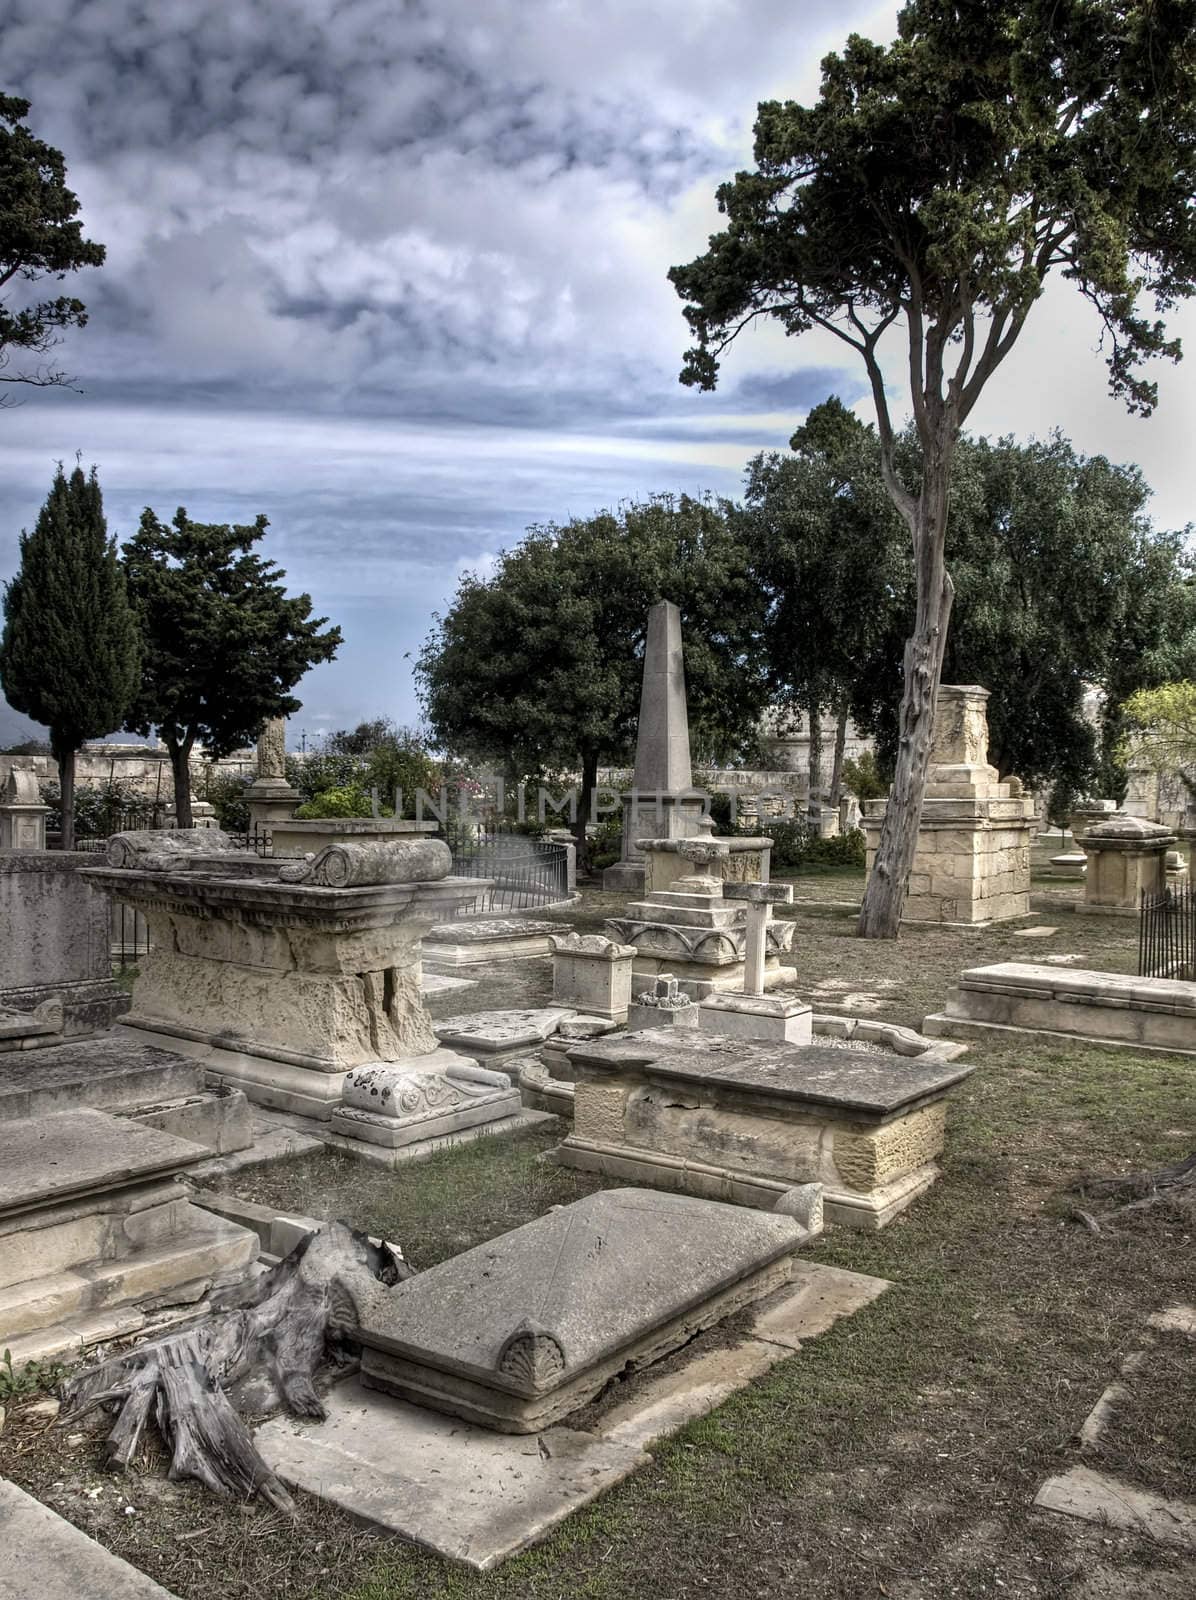 Ghost of a woman at a 19th century graveyard in Malta